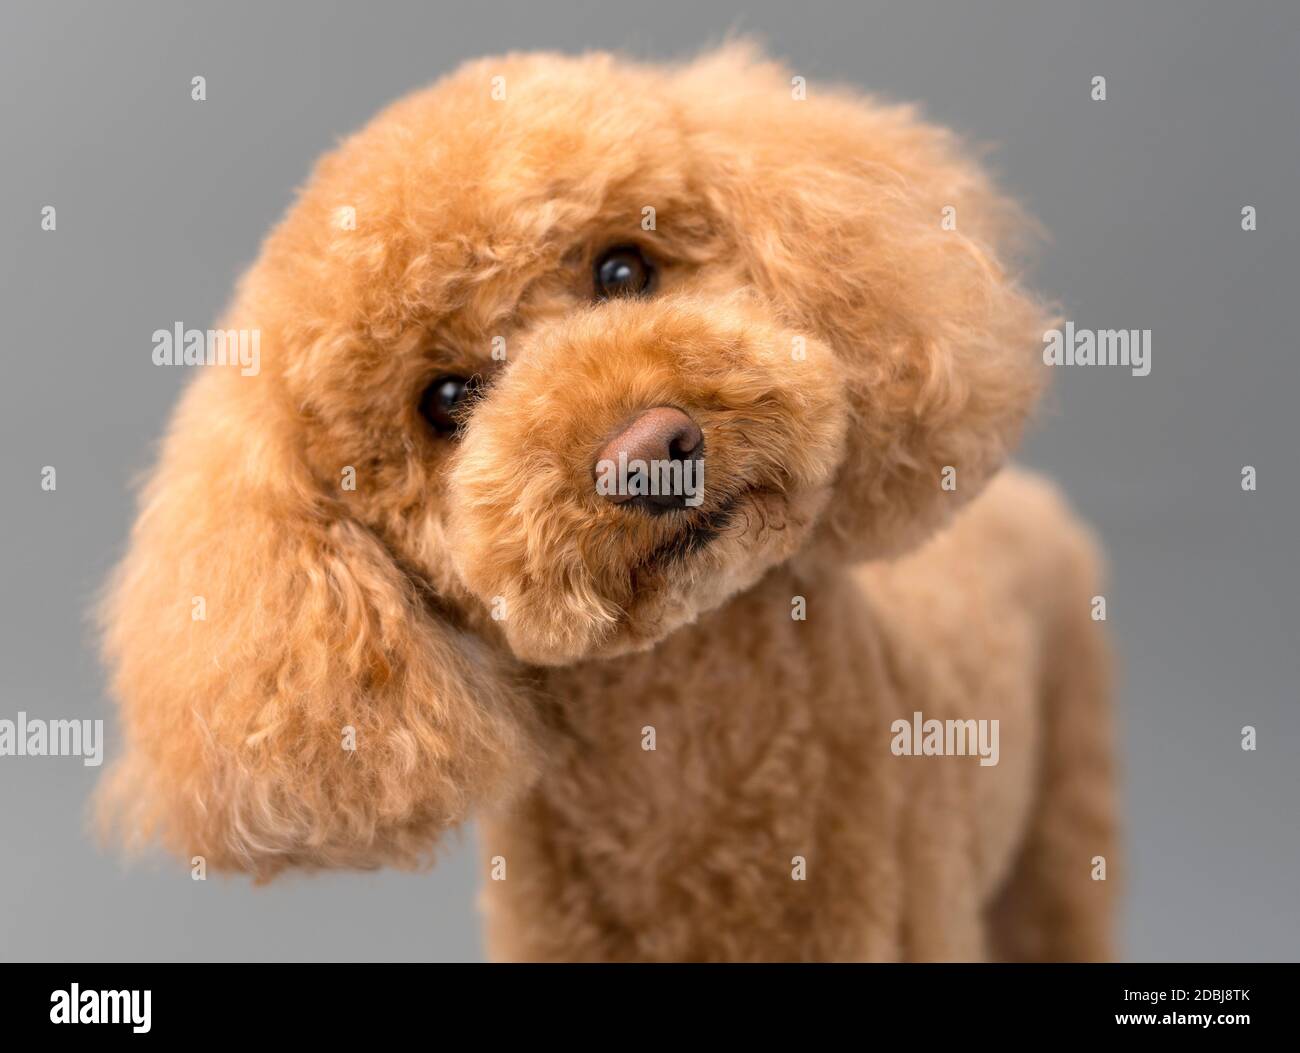 A toy poodle puppy stares innocently at the camera Stock Photo - Alamy